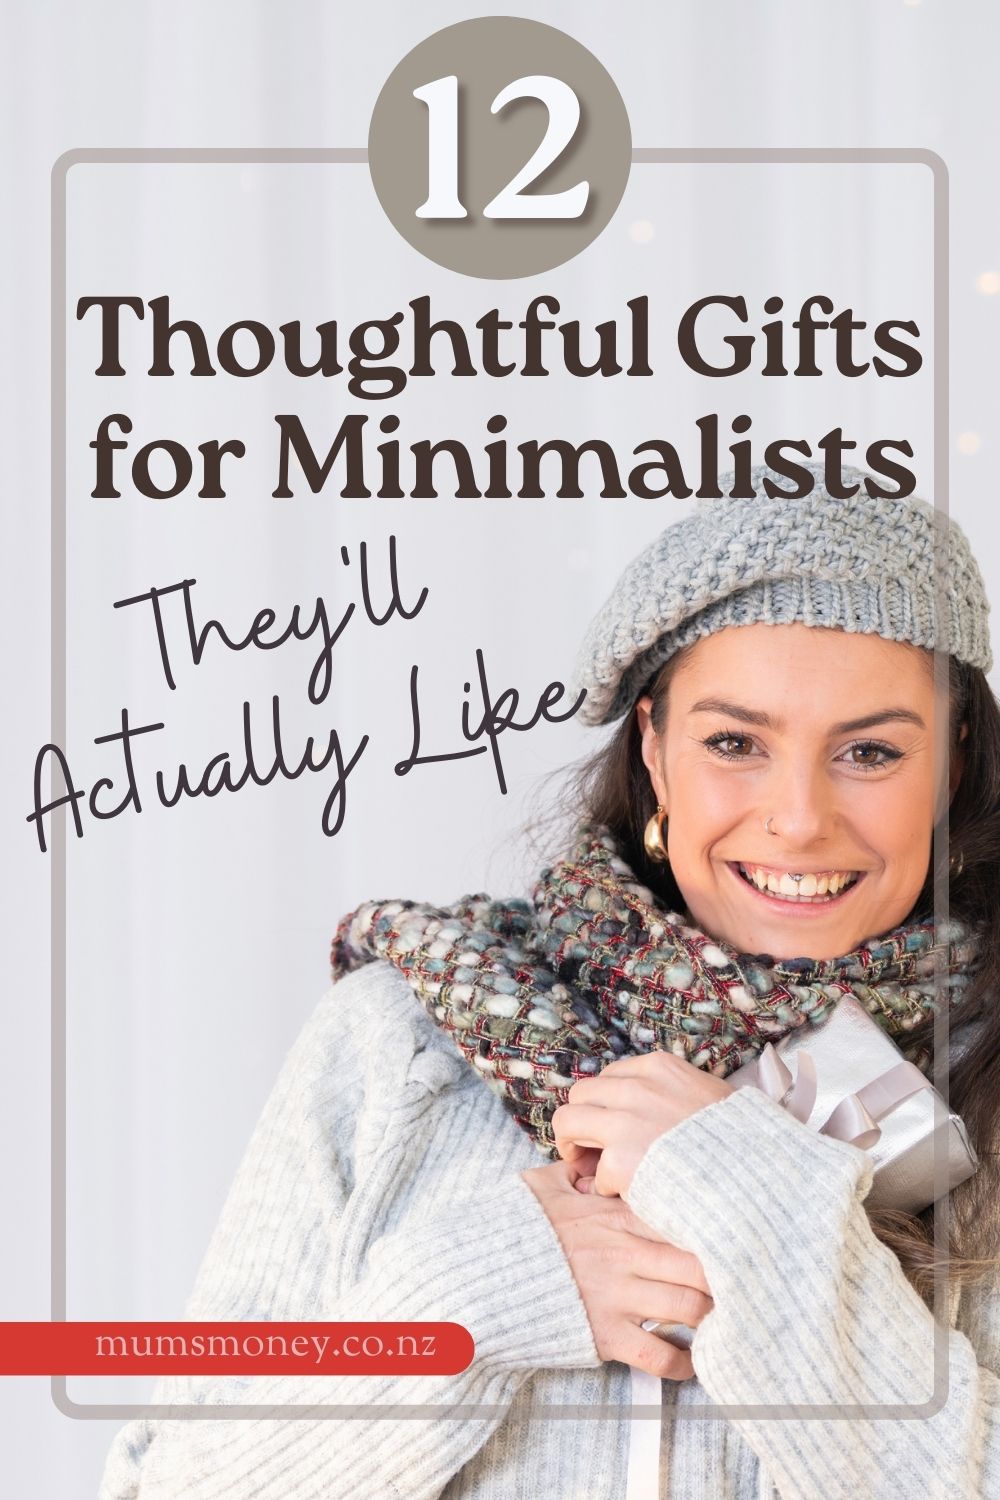 Thoughtful Gifts for Minimalists